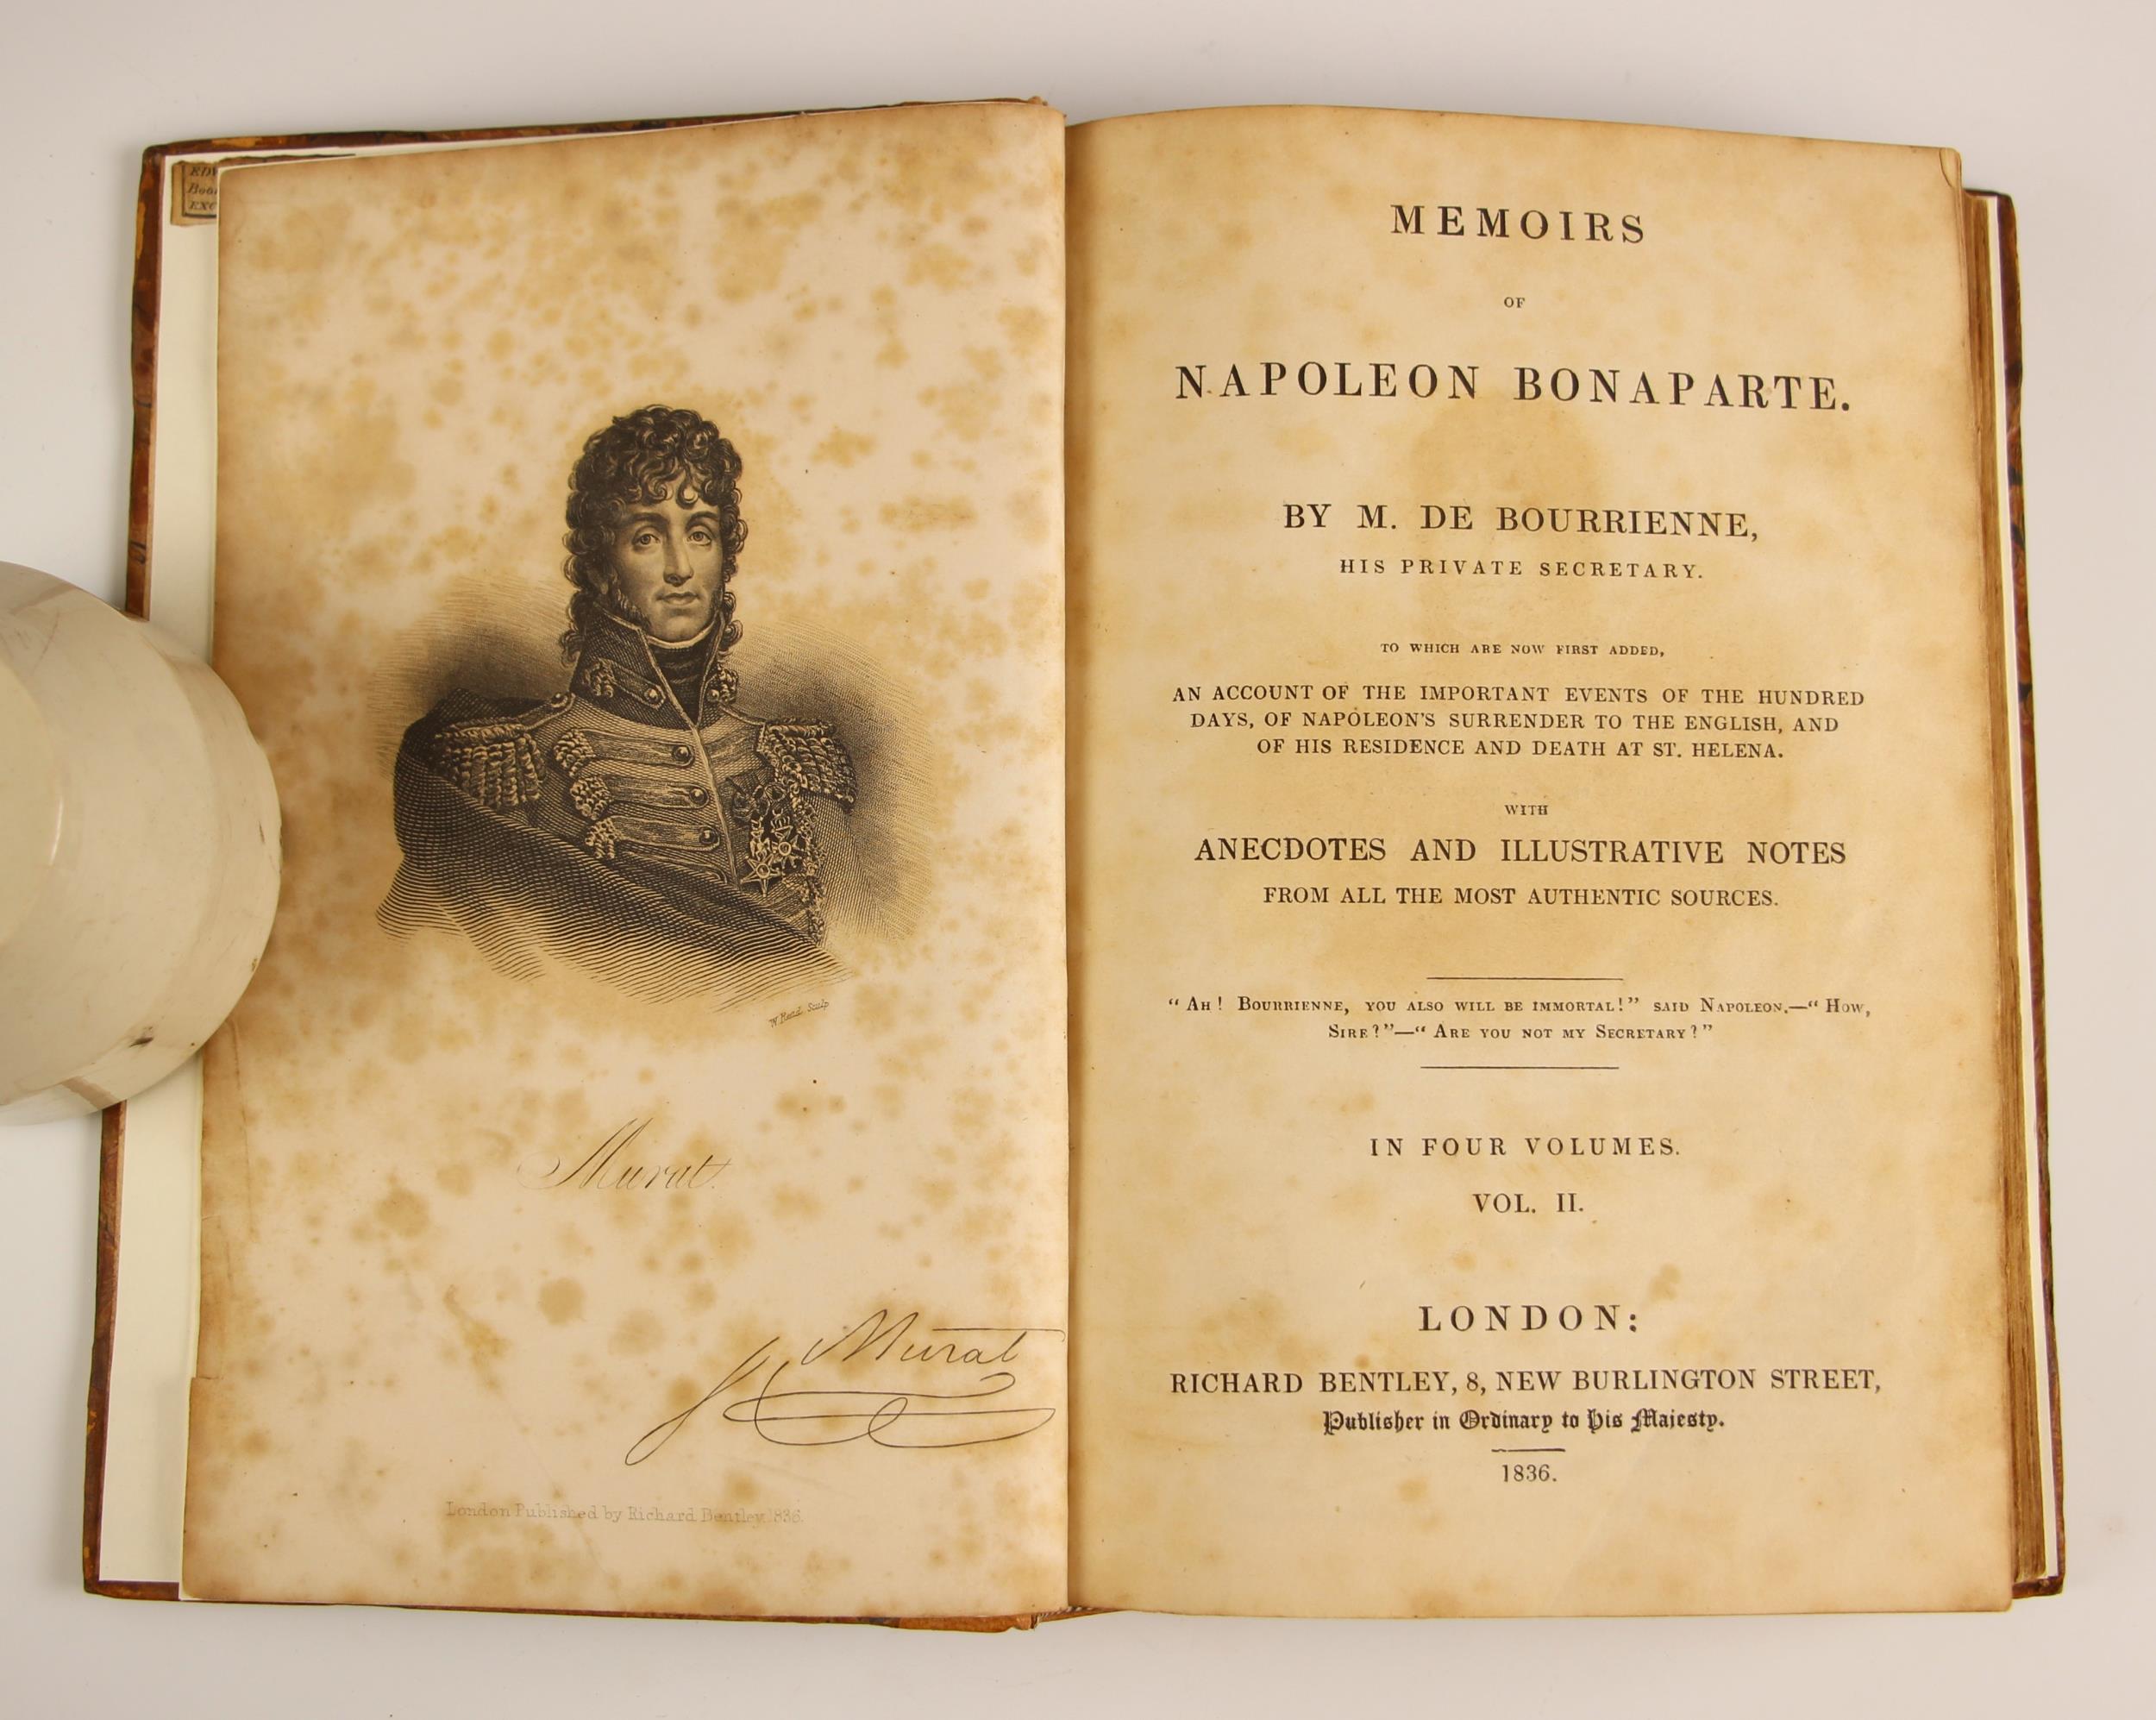 De Bourrienne (M), MEMOIRS OF NAPOLEON BONAPARTE, 4 vols, first edition, 3/4 leather (later spine - Image 4 of 6